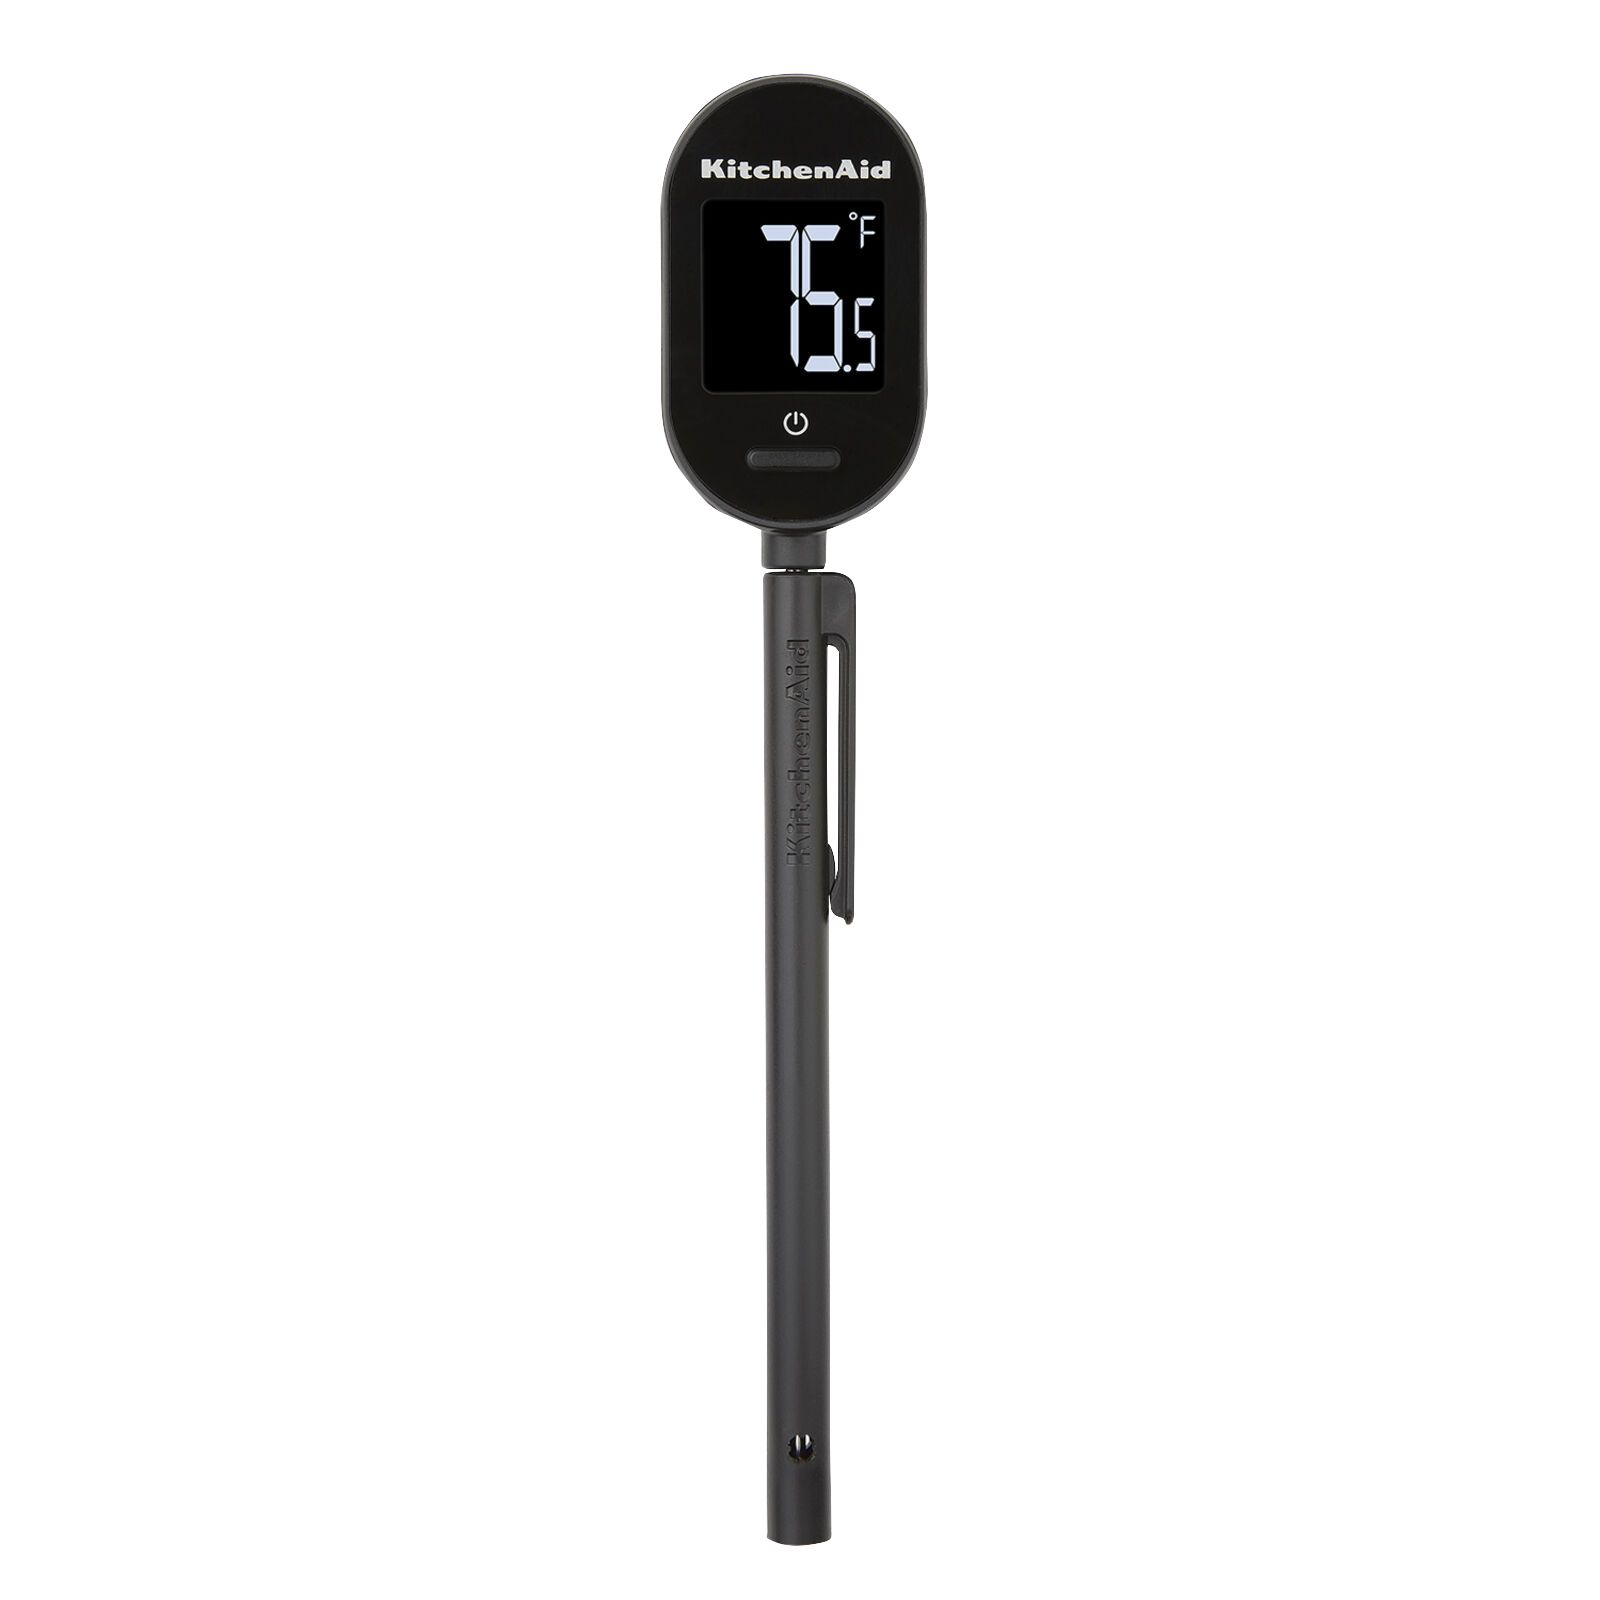 Digital Cake Thermometer Stainless Steel Instant Read Cooking Electronic  5.9 Inch